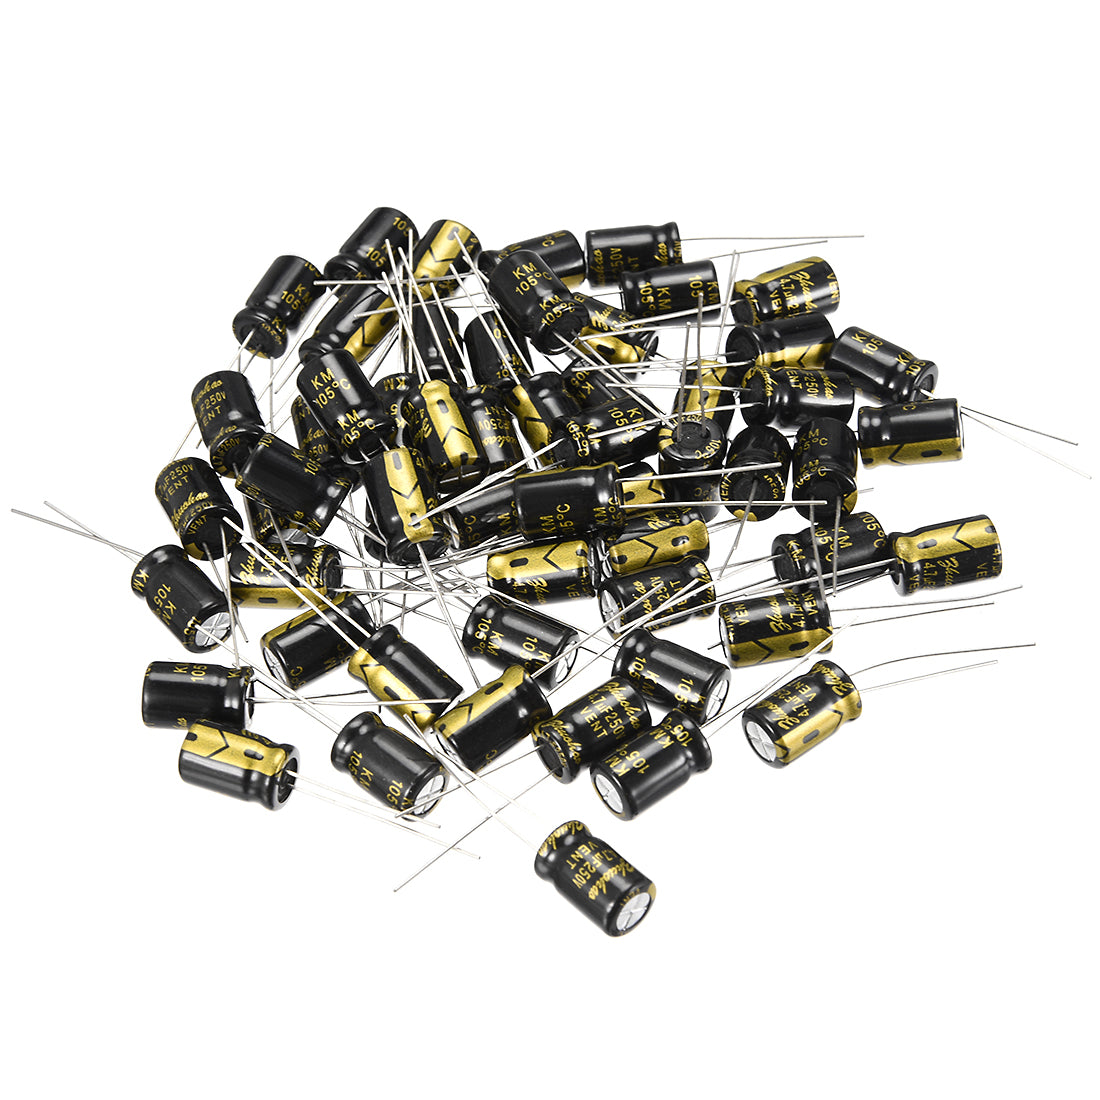 uxcell Uxcell Aluminum Radial Electrolytic Capacitor with 4.7uF 250V 105 Celsius Life 2000H 8 x 12 mm Black 50pcs